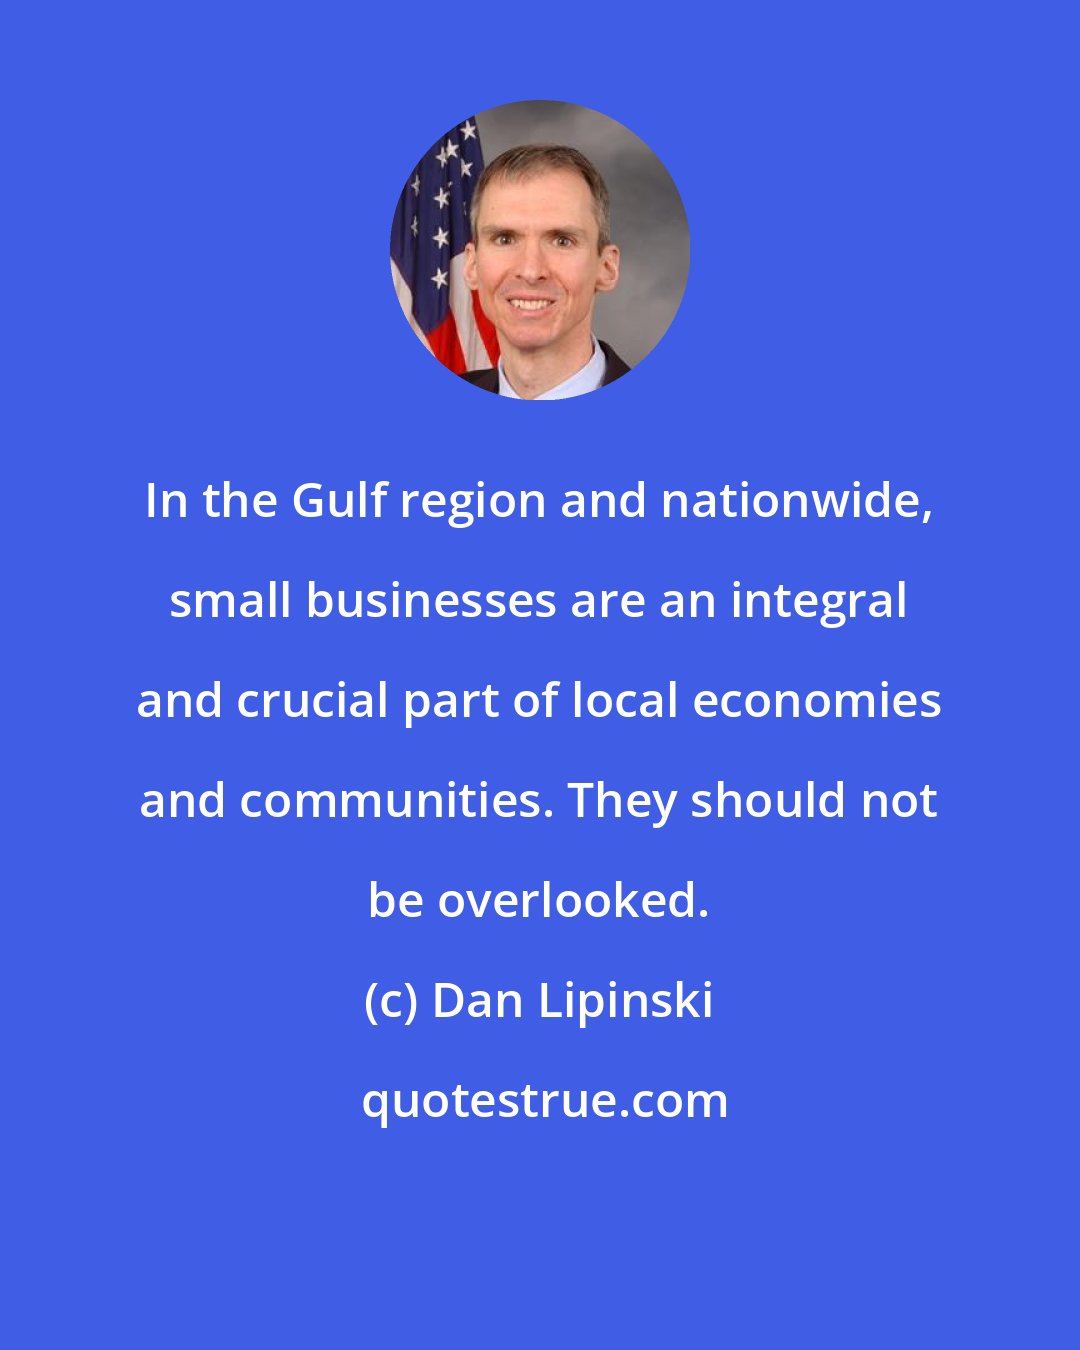 Dan Lipinski: In the Gulf region and nationwide, small businesses are an integral and crucial part of local economies and communities. They should not be overlooked.